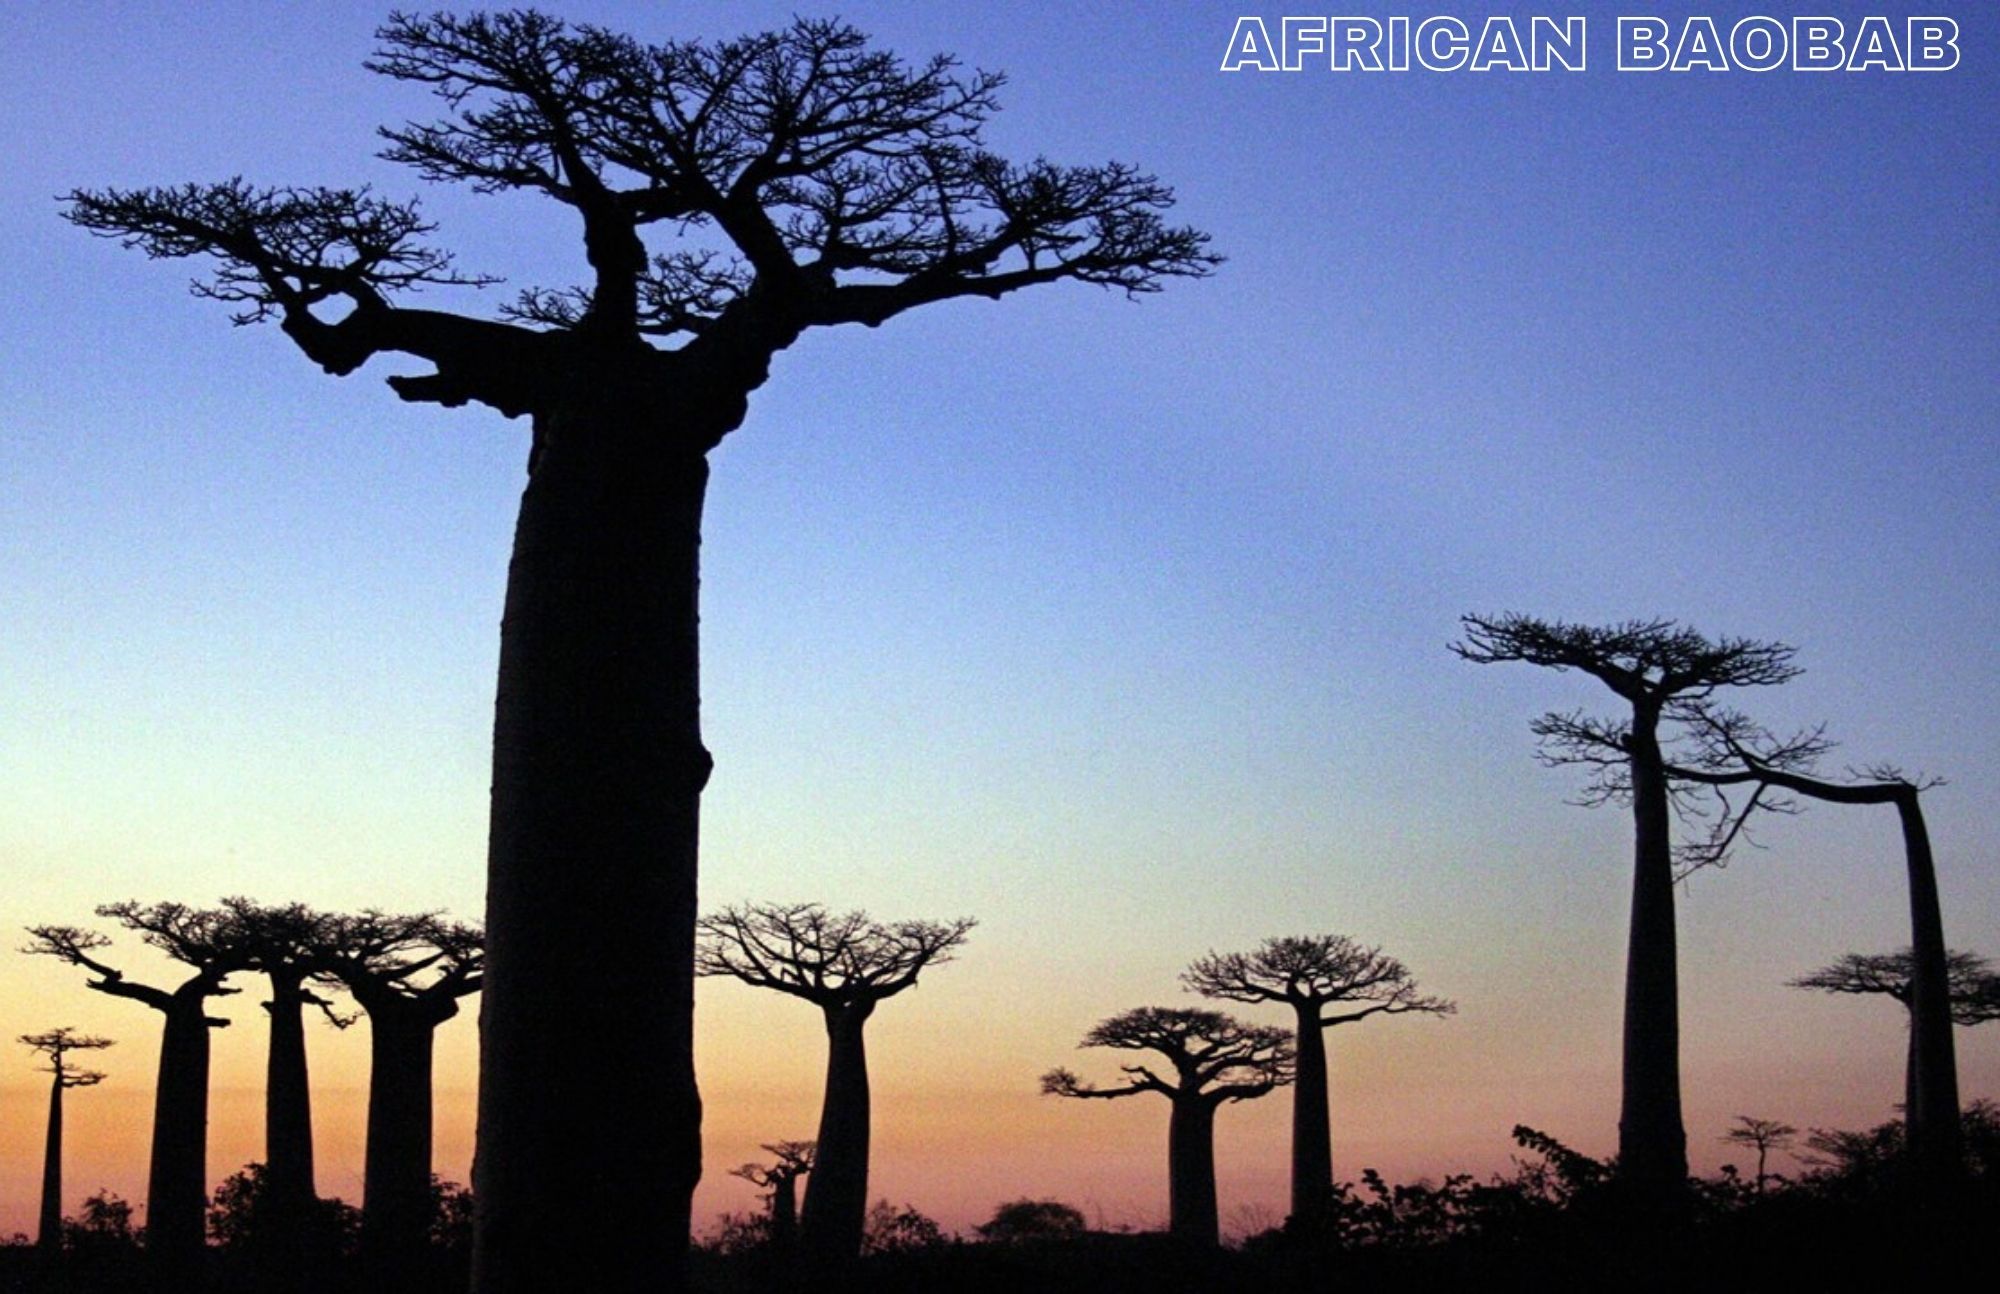 African Baobab trees in silhouette